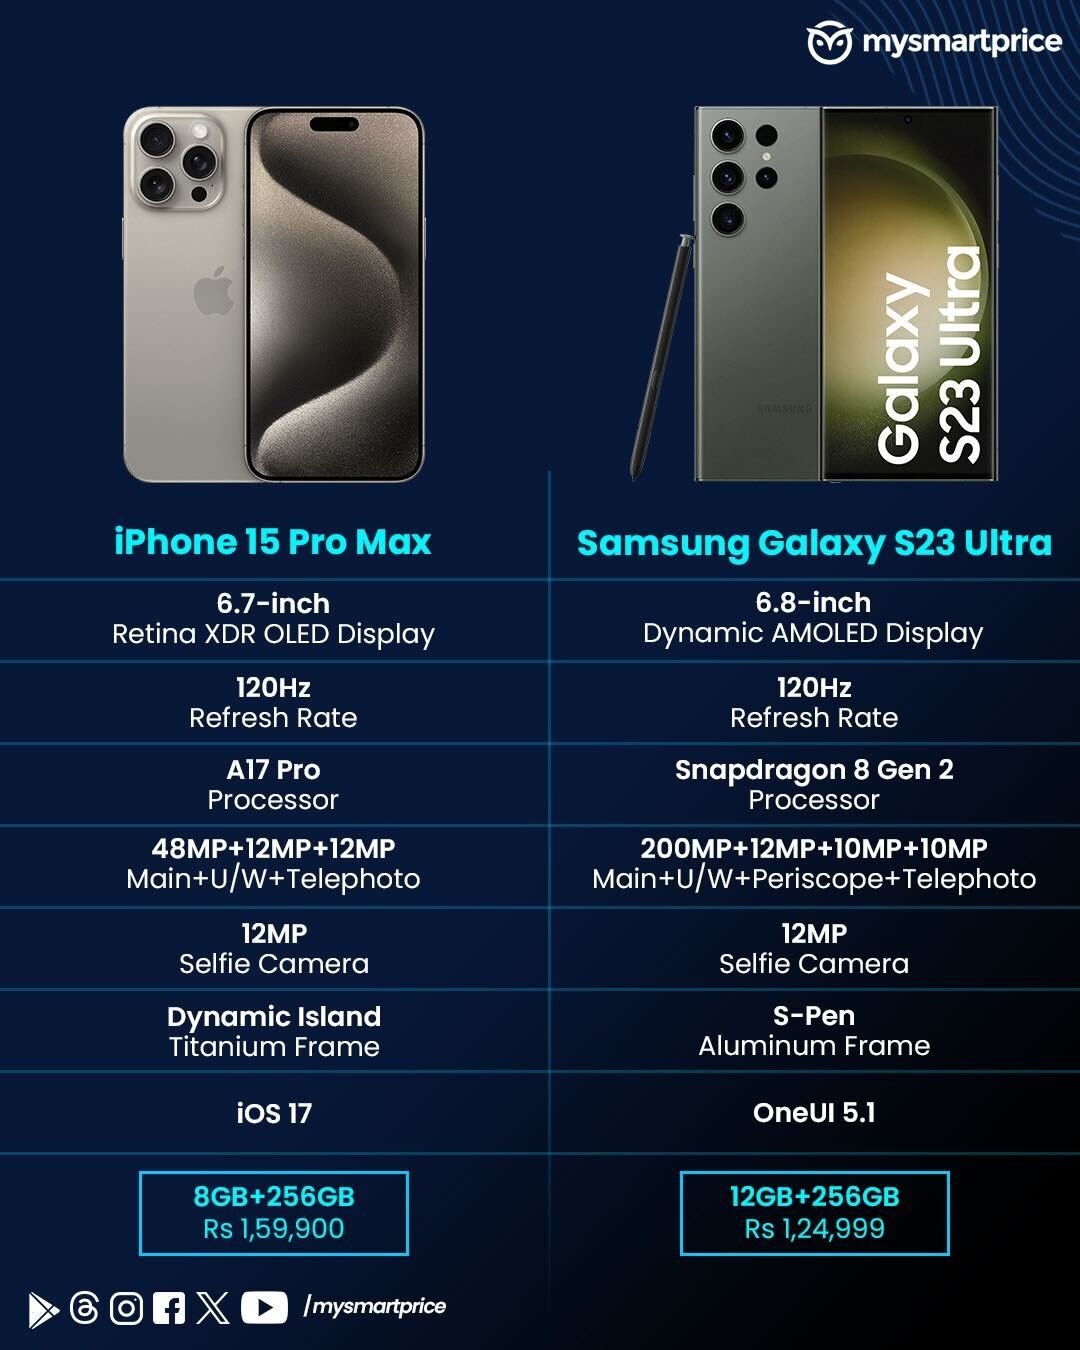 The S23 Ultra is now cheaper than the iPhone 15